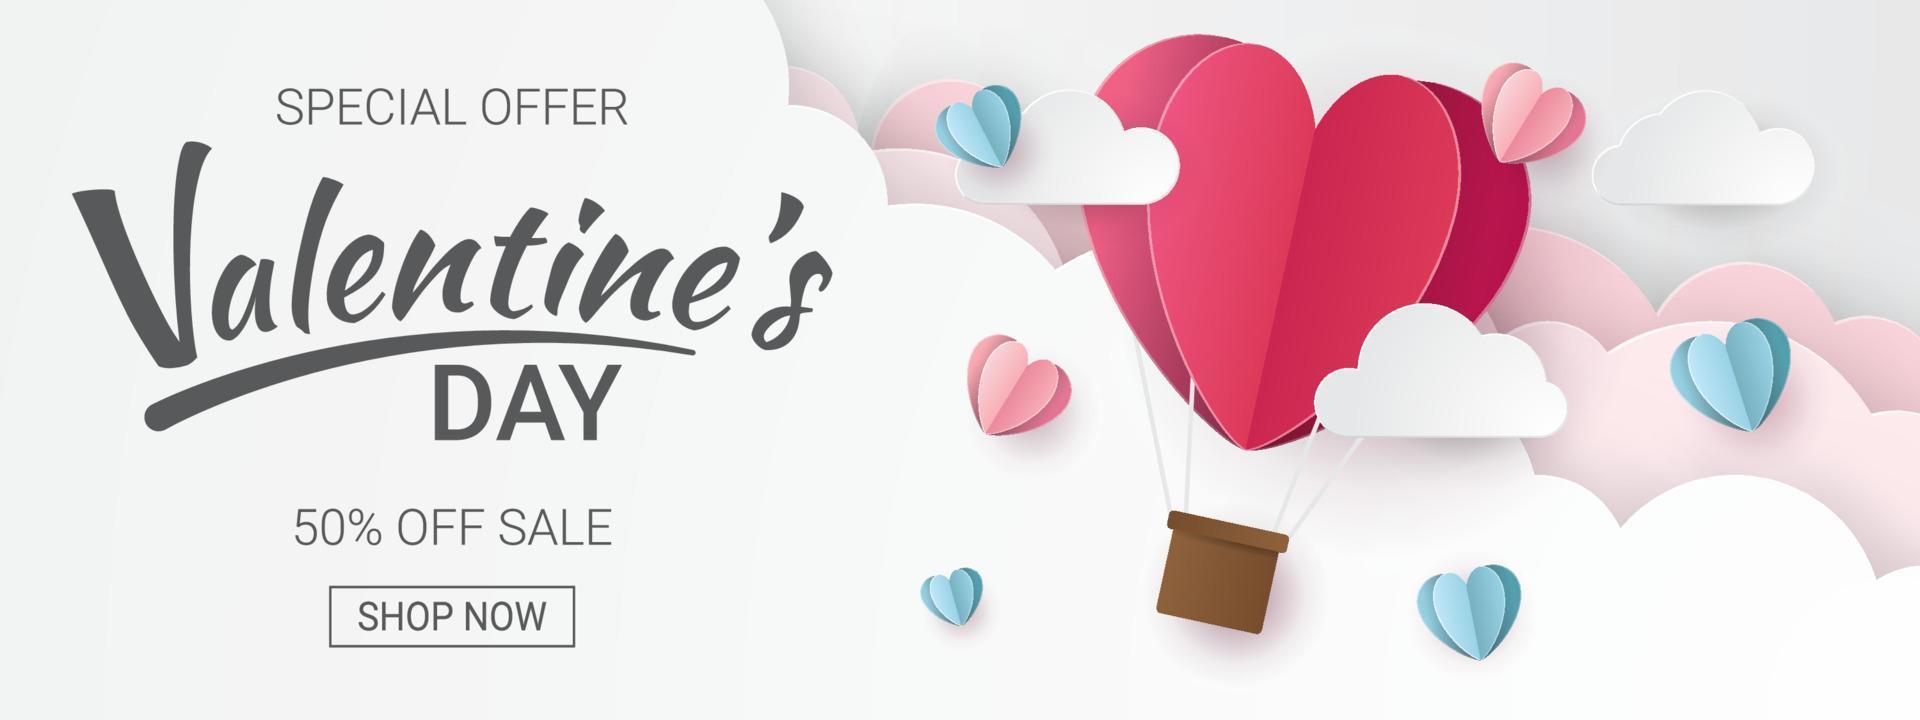 Valentine's Day sale banner. Paper cut style. Vector illustration